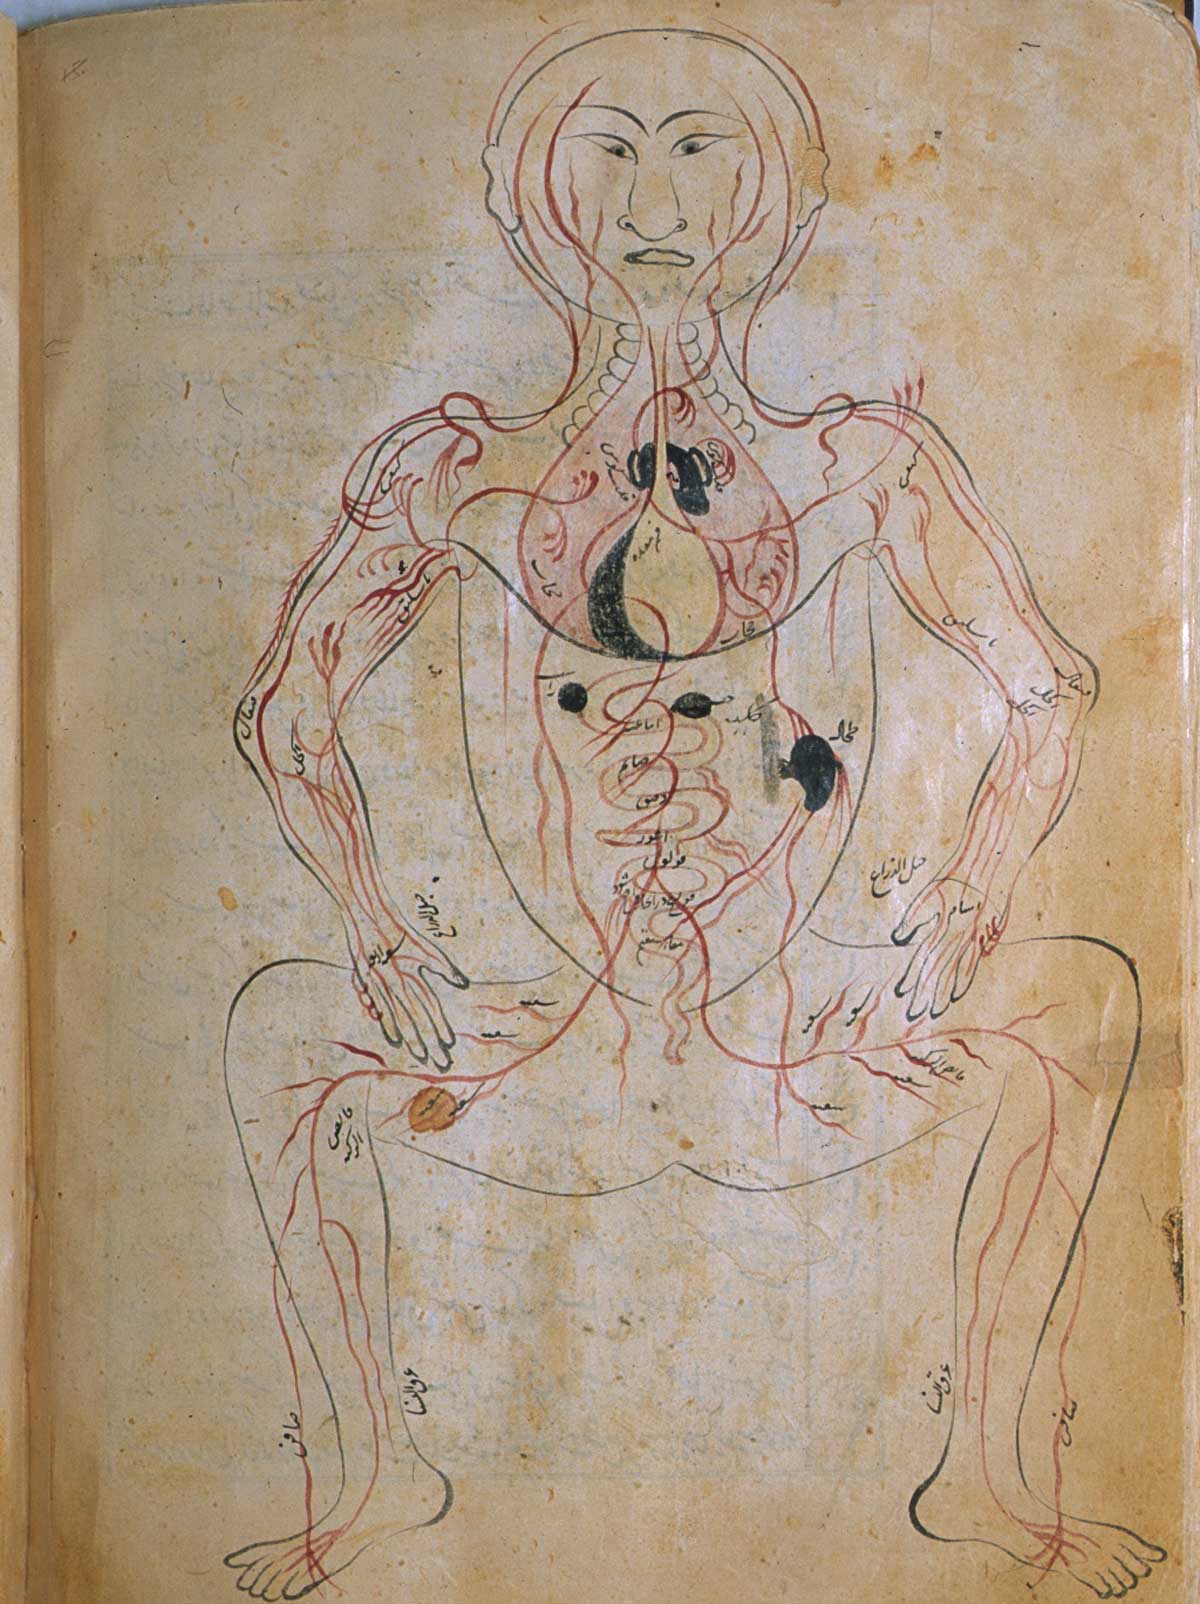 Folio 25b of Mansur ibn Ilyas' Tashrih-i badan-i insan, featuring the venous system, with the figure drawn frontally and the internal organs indicated in opaque watercolors.